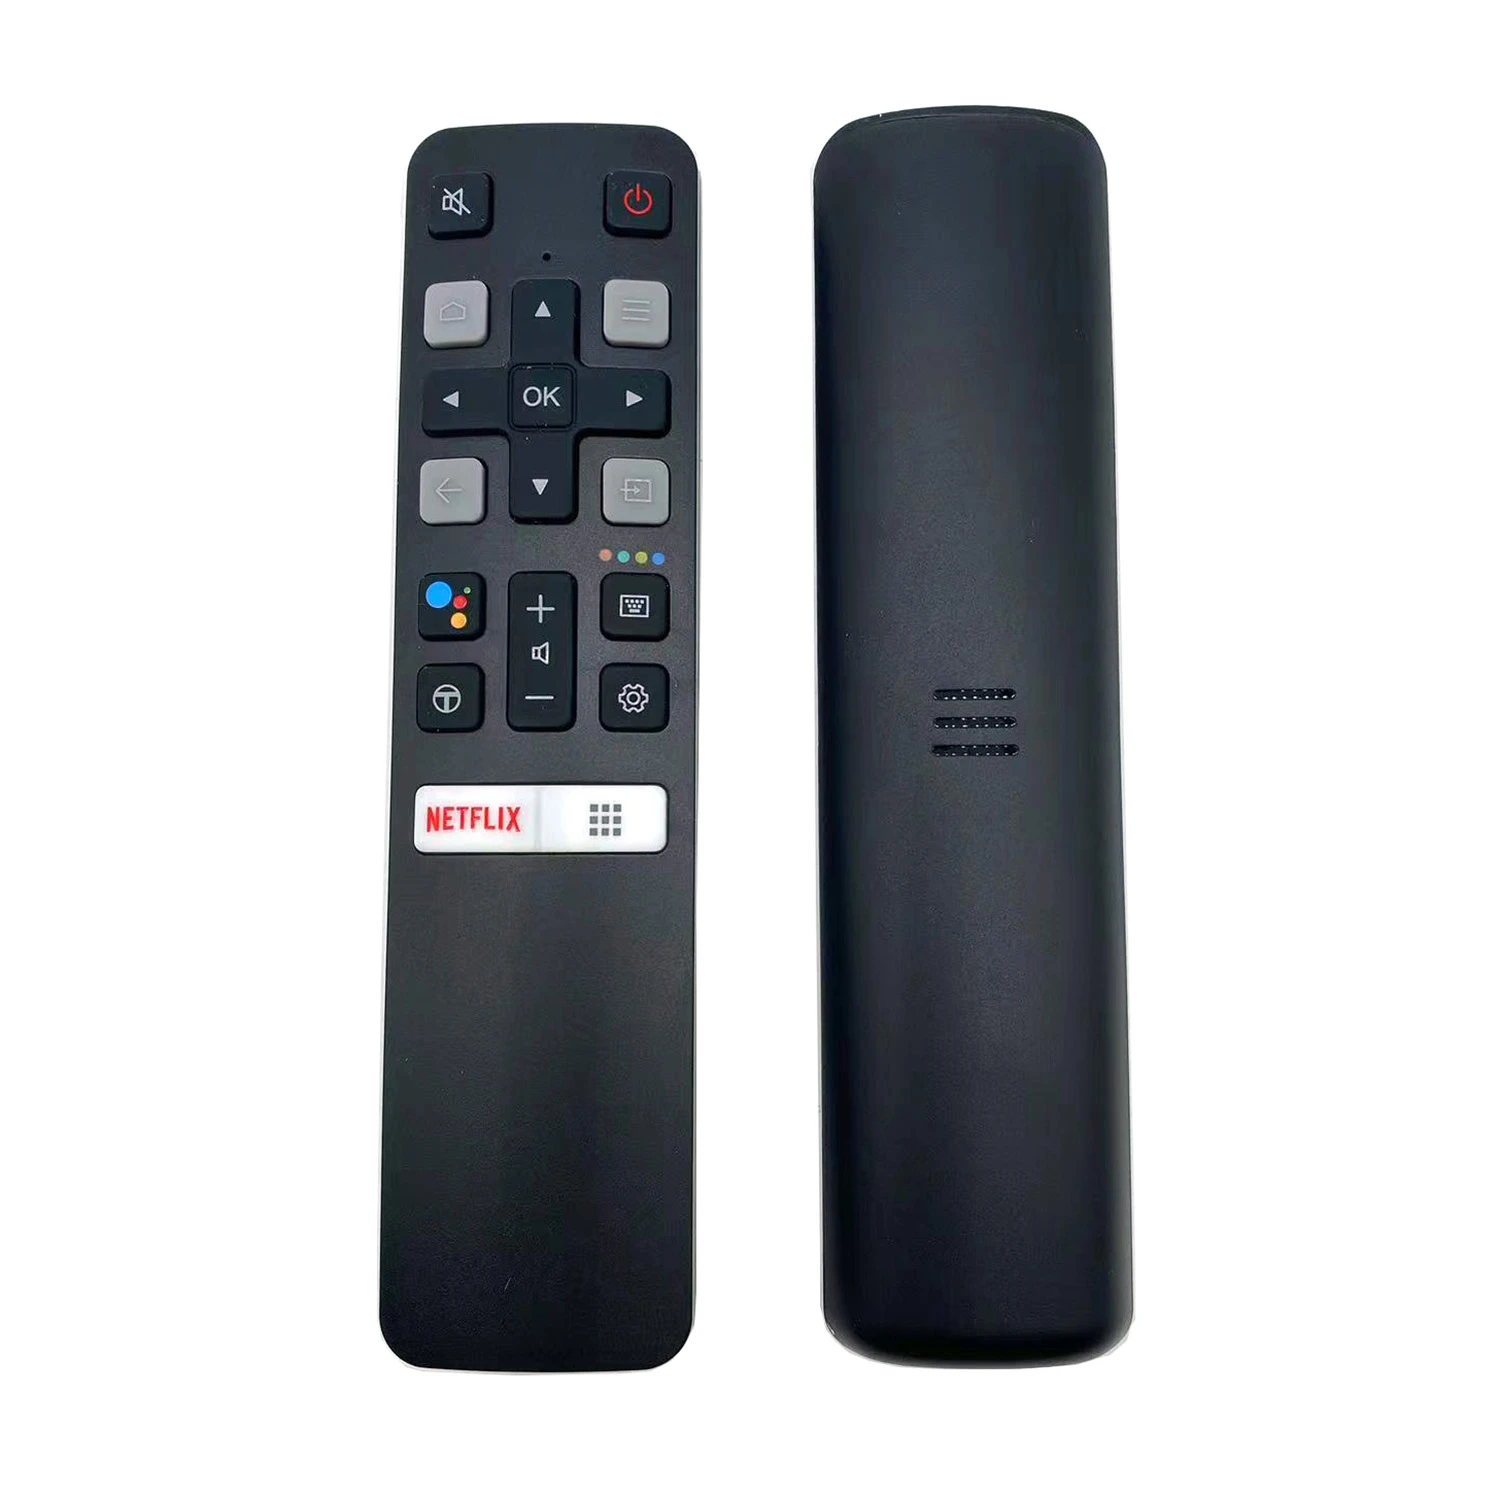 IR NEW remote control RC802V JUR6 For TCL TV 65P8S 49S6800FS 49S6510FS 55P8S 55EP680 50P8S 49S6800FS 49S6510FS